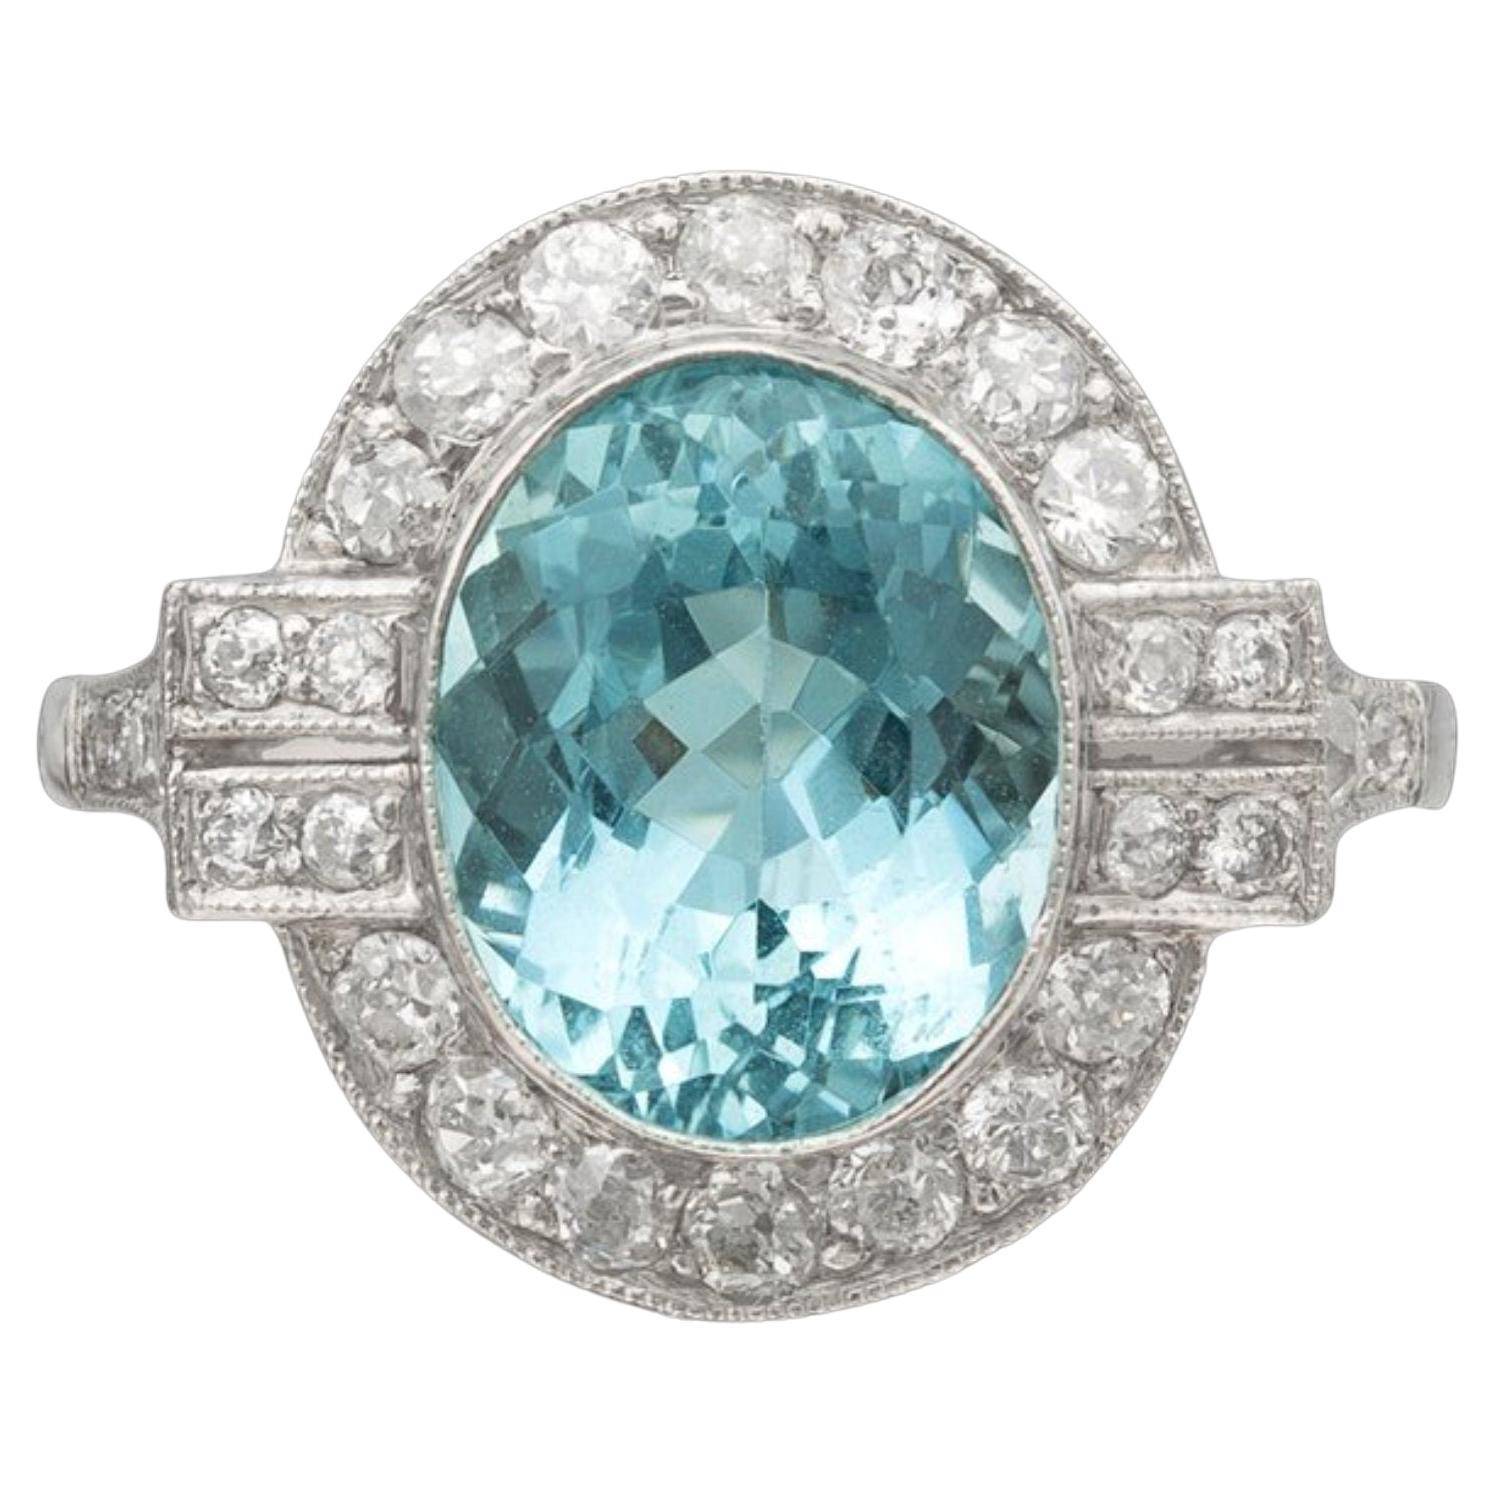 For Sale:  Certified 5 Carat Halo Natural Aquamarine Diamond Antique Style Engagement Ring